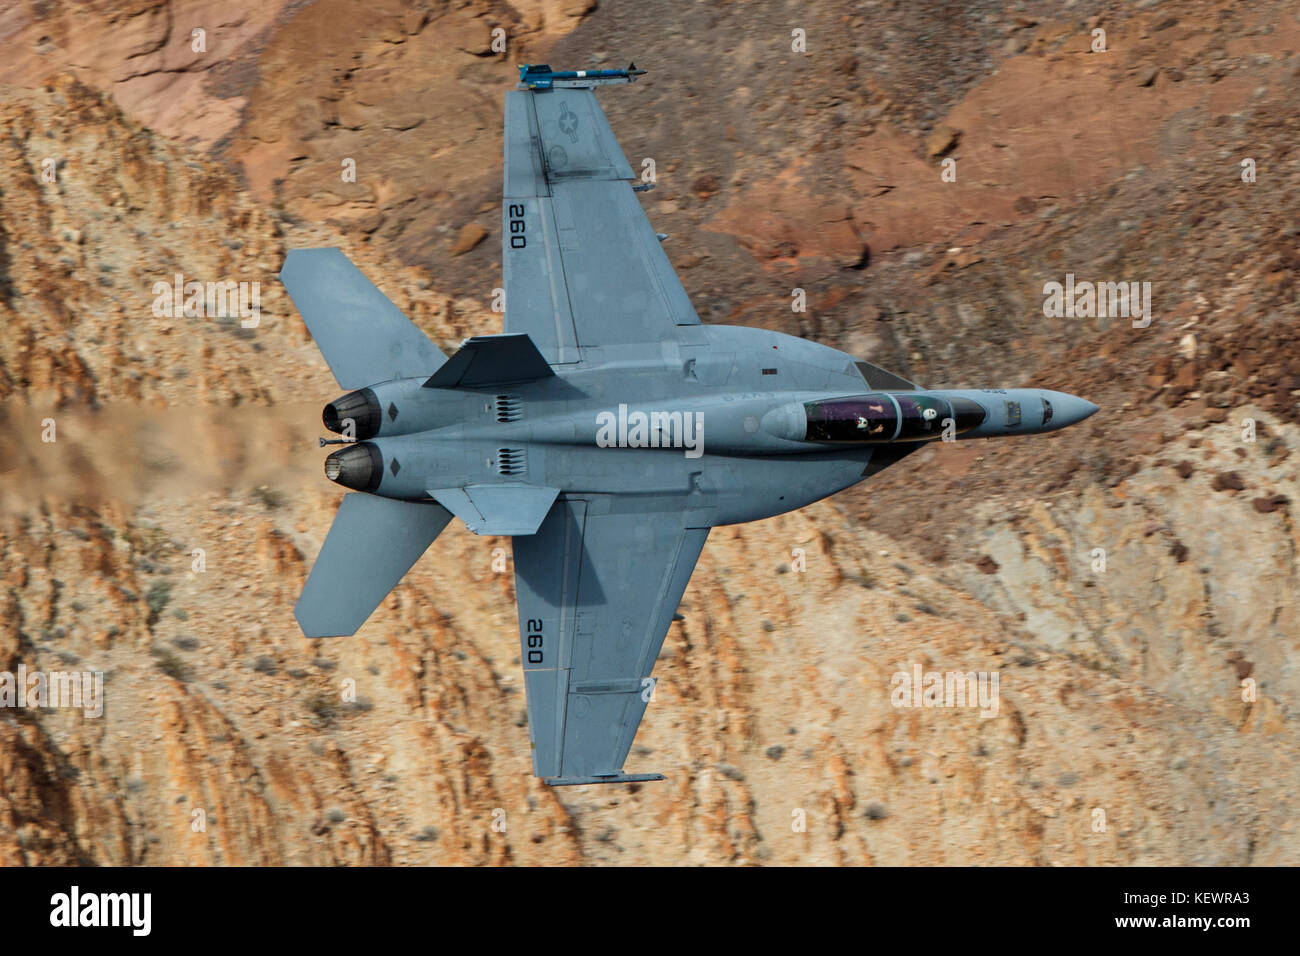 Boeing F/A-18F Super Hornet (XE-260) from the United States Navy VX-9 Vampires squadron, Naval Air Weapons Station China Lake, flies low level through the Jedi Transition, Star Wars Canyon, Death Valley National Park, California, United States of America Stock Photo